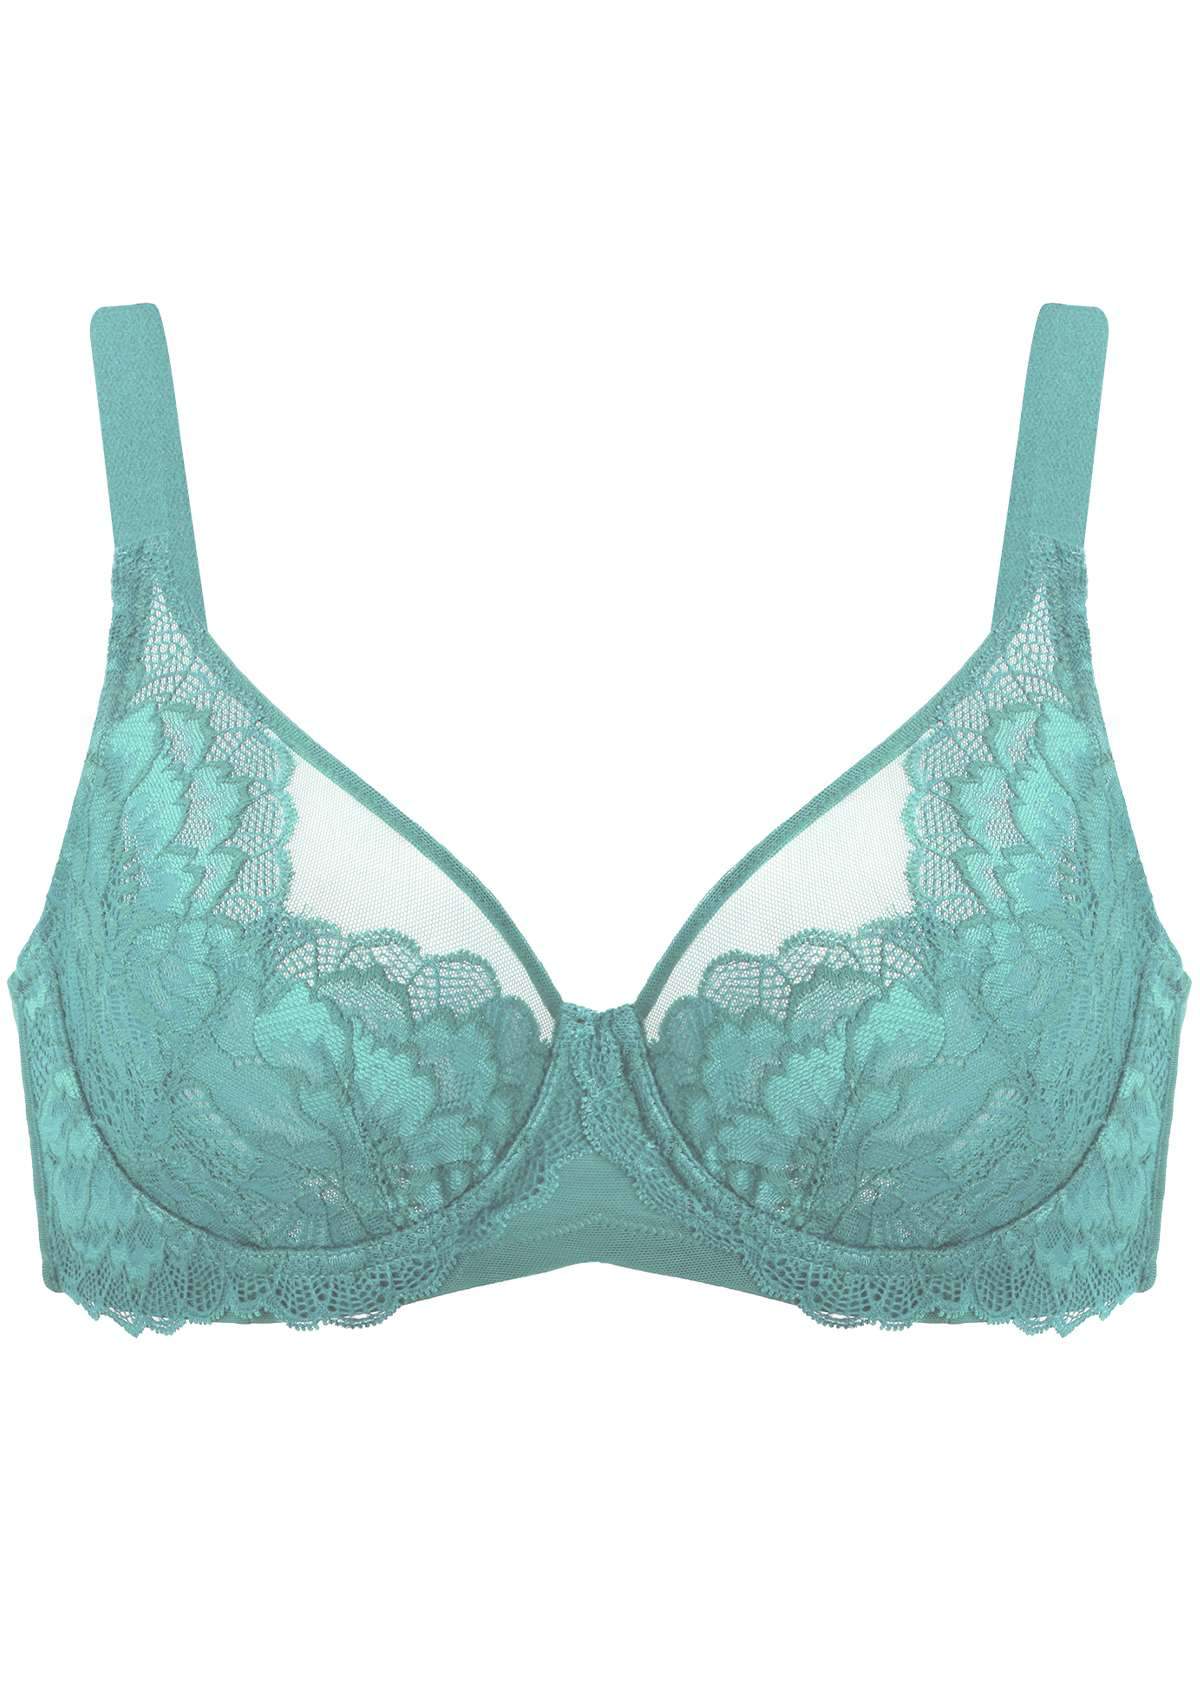 HSIA Peony Lace Unlined Supportive Underwire Bra - Light Coral / 34 / D